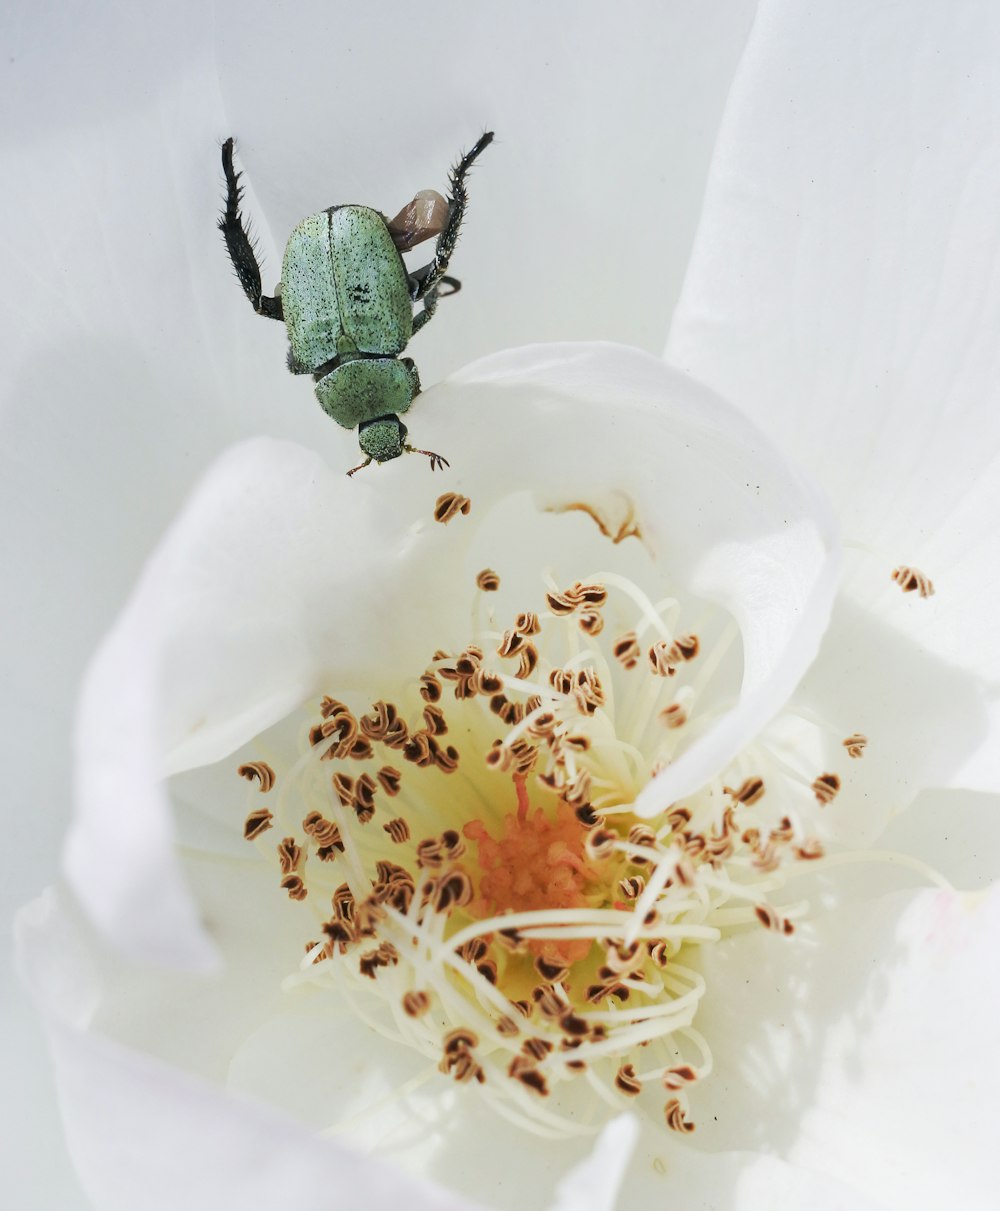 close up photo of white broad petaled flower with green bug